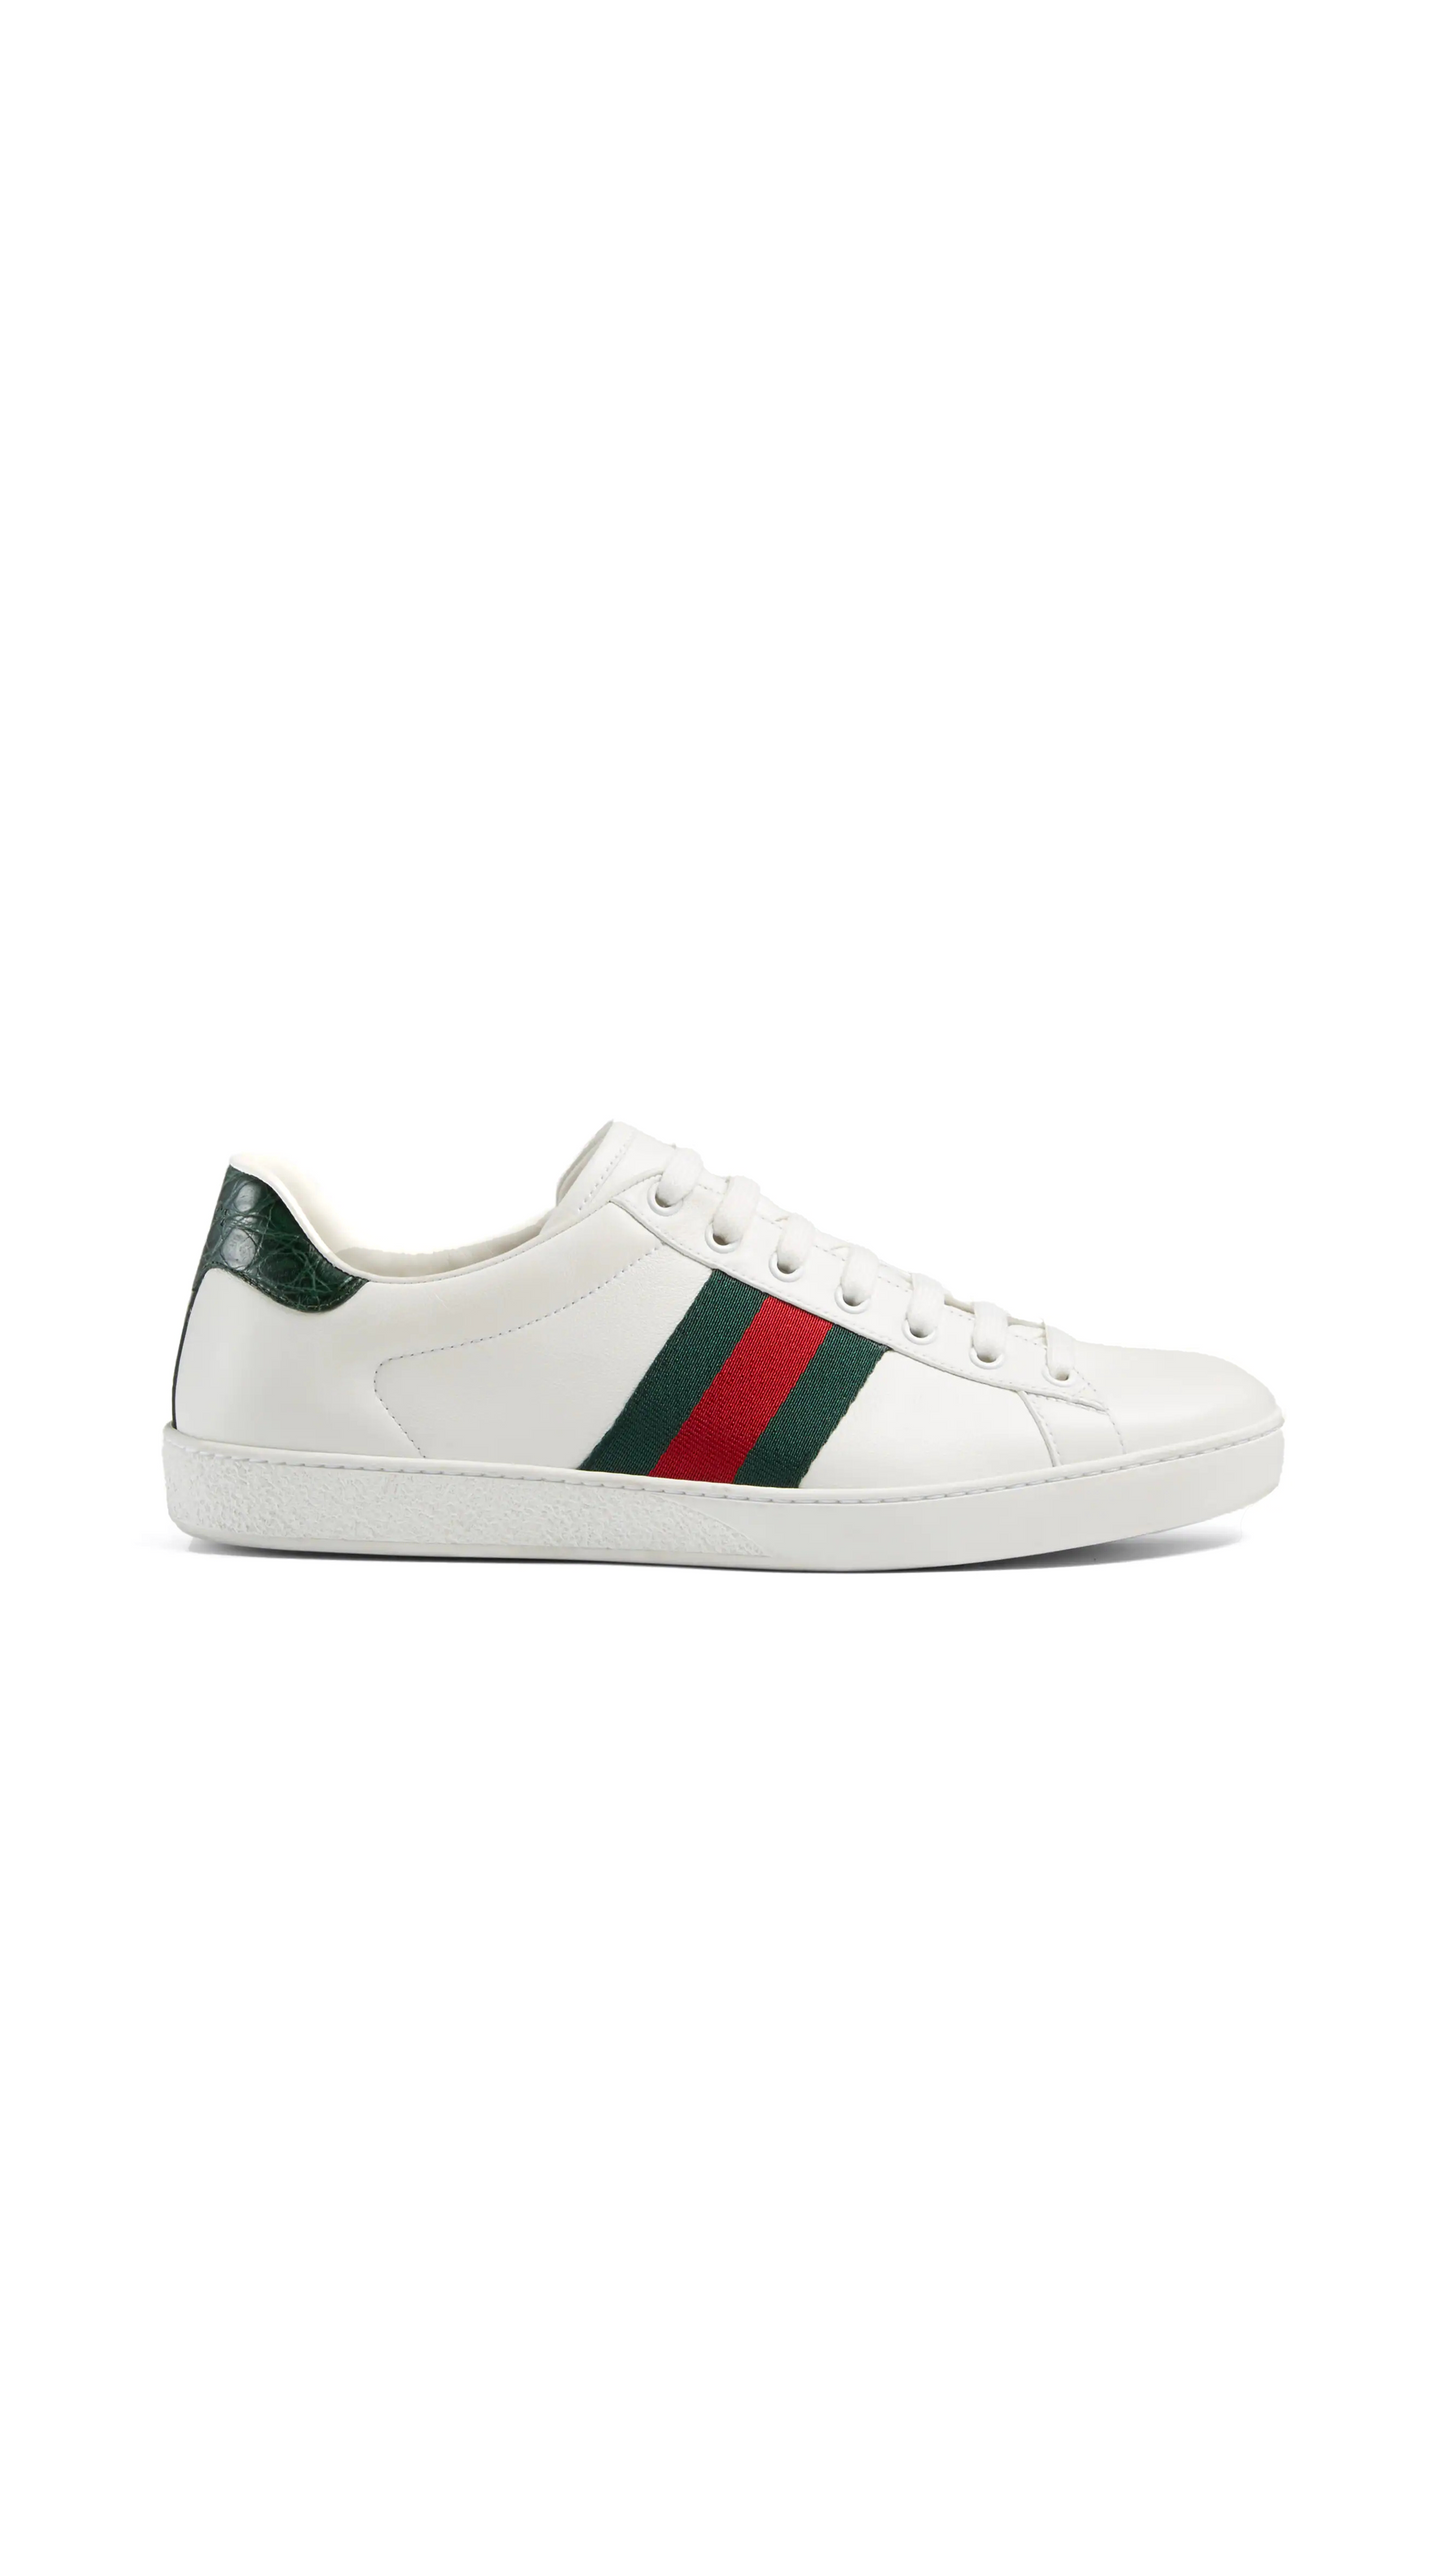 Ace Leather Sneaker - White / Green / Red